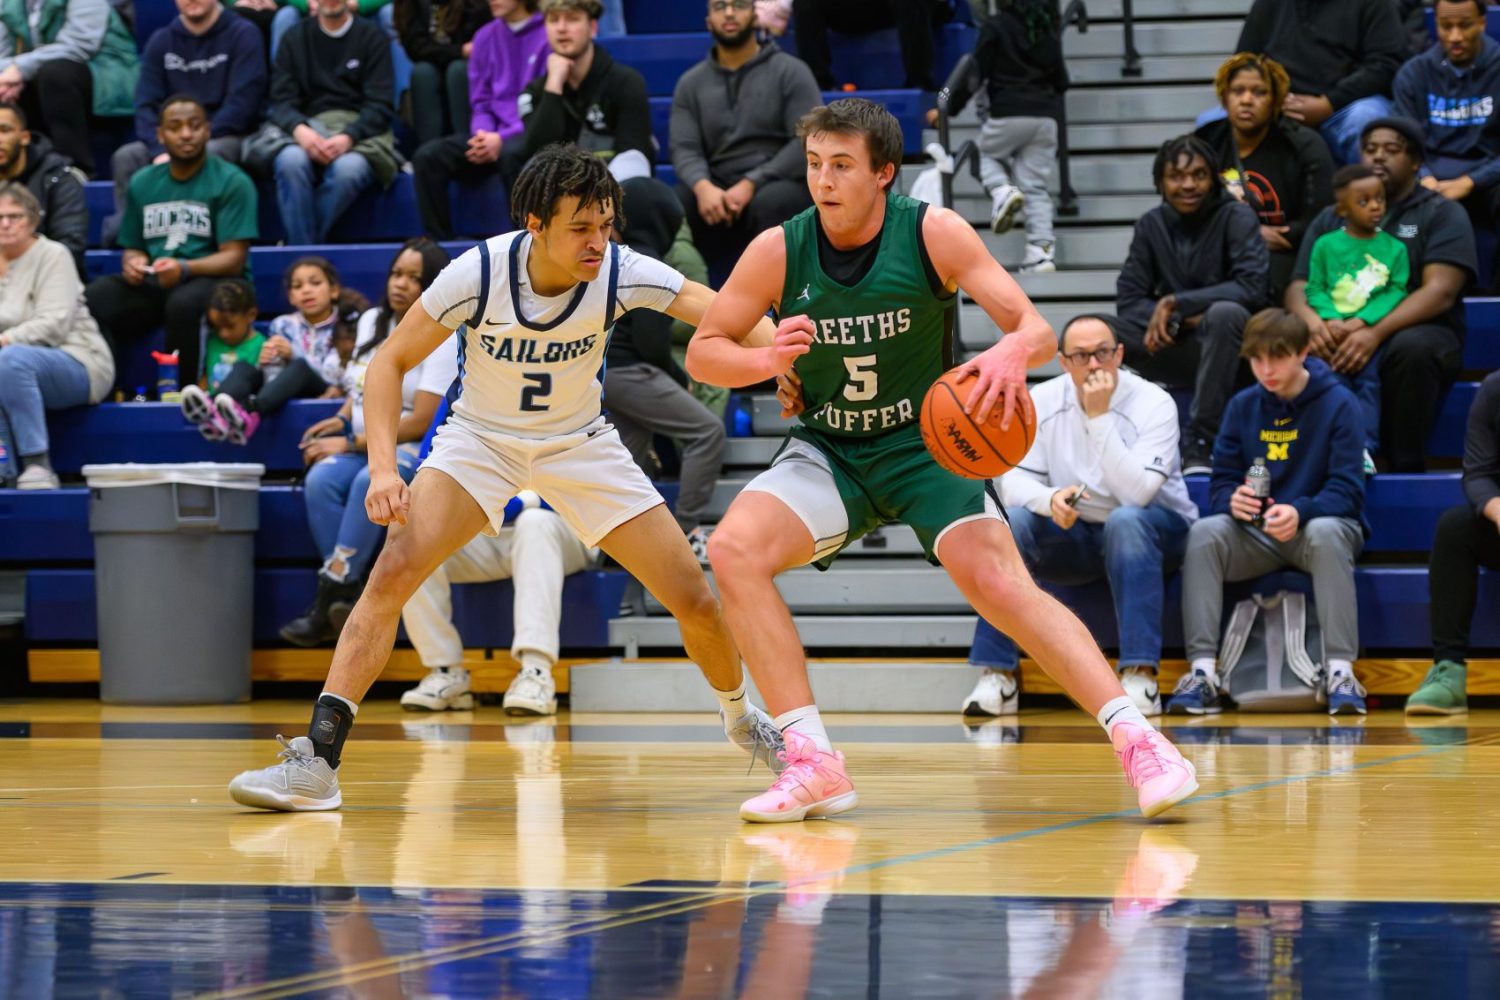 Reeths-Puffer’s 1-2 punch of Whitaker, Ambrose lead Rockets to victory over Mona Shores